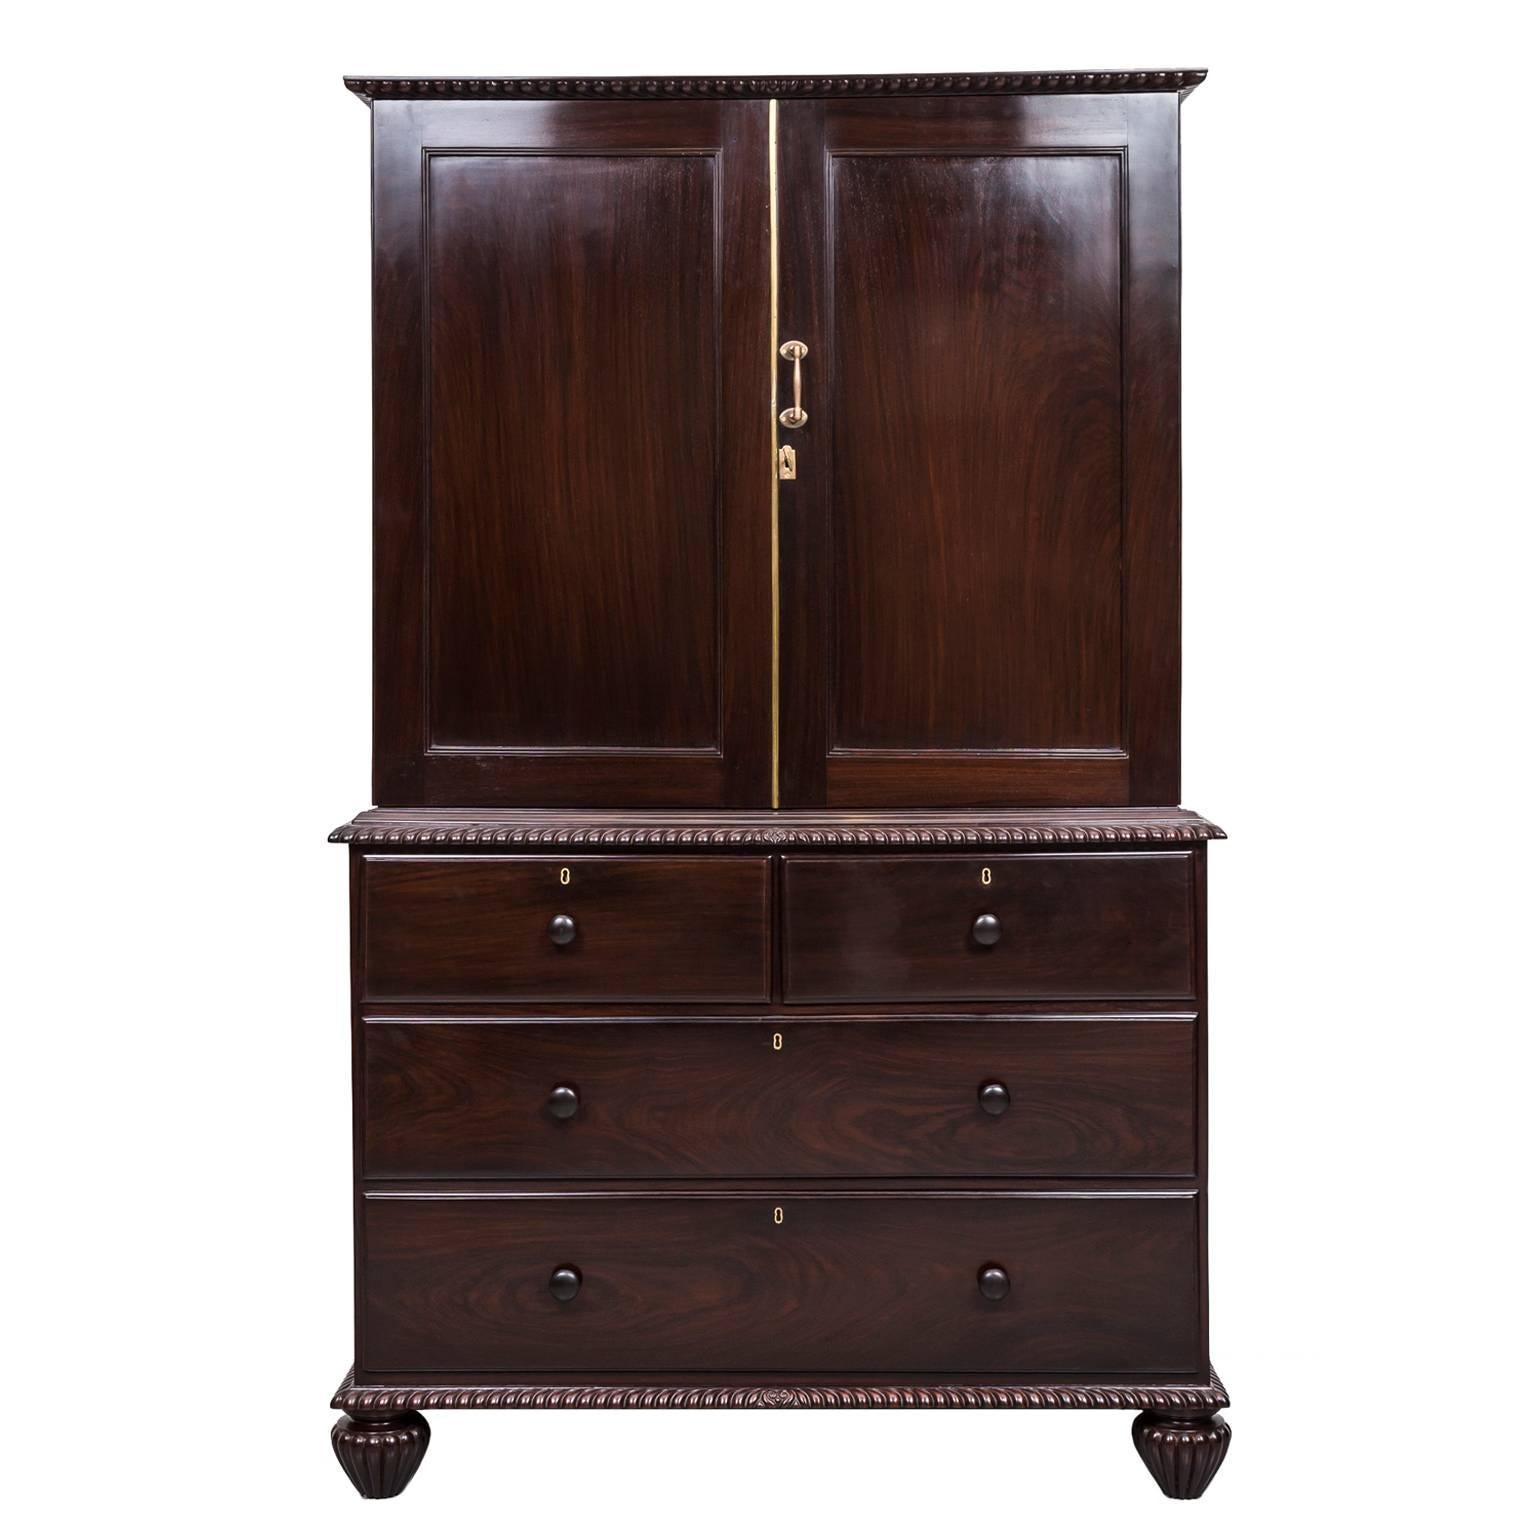 Anglo-Indian or British Colonial Rosewood Cupboard